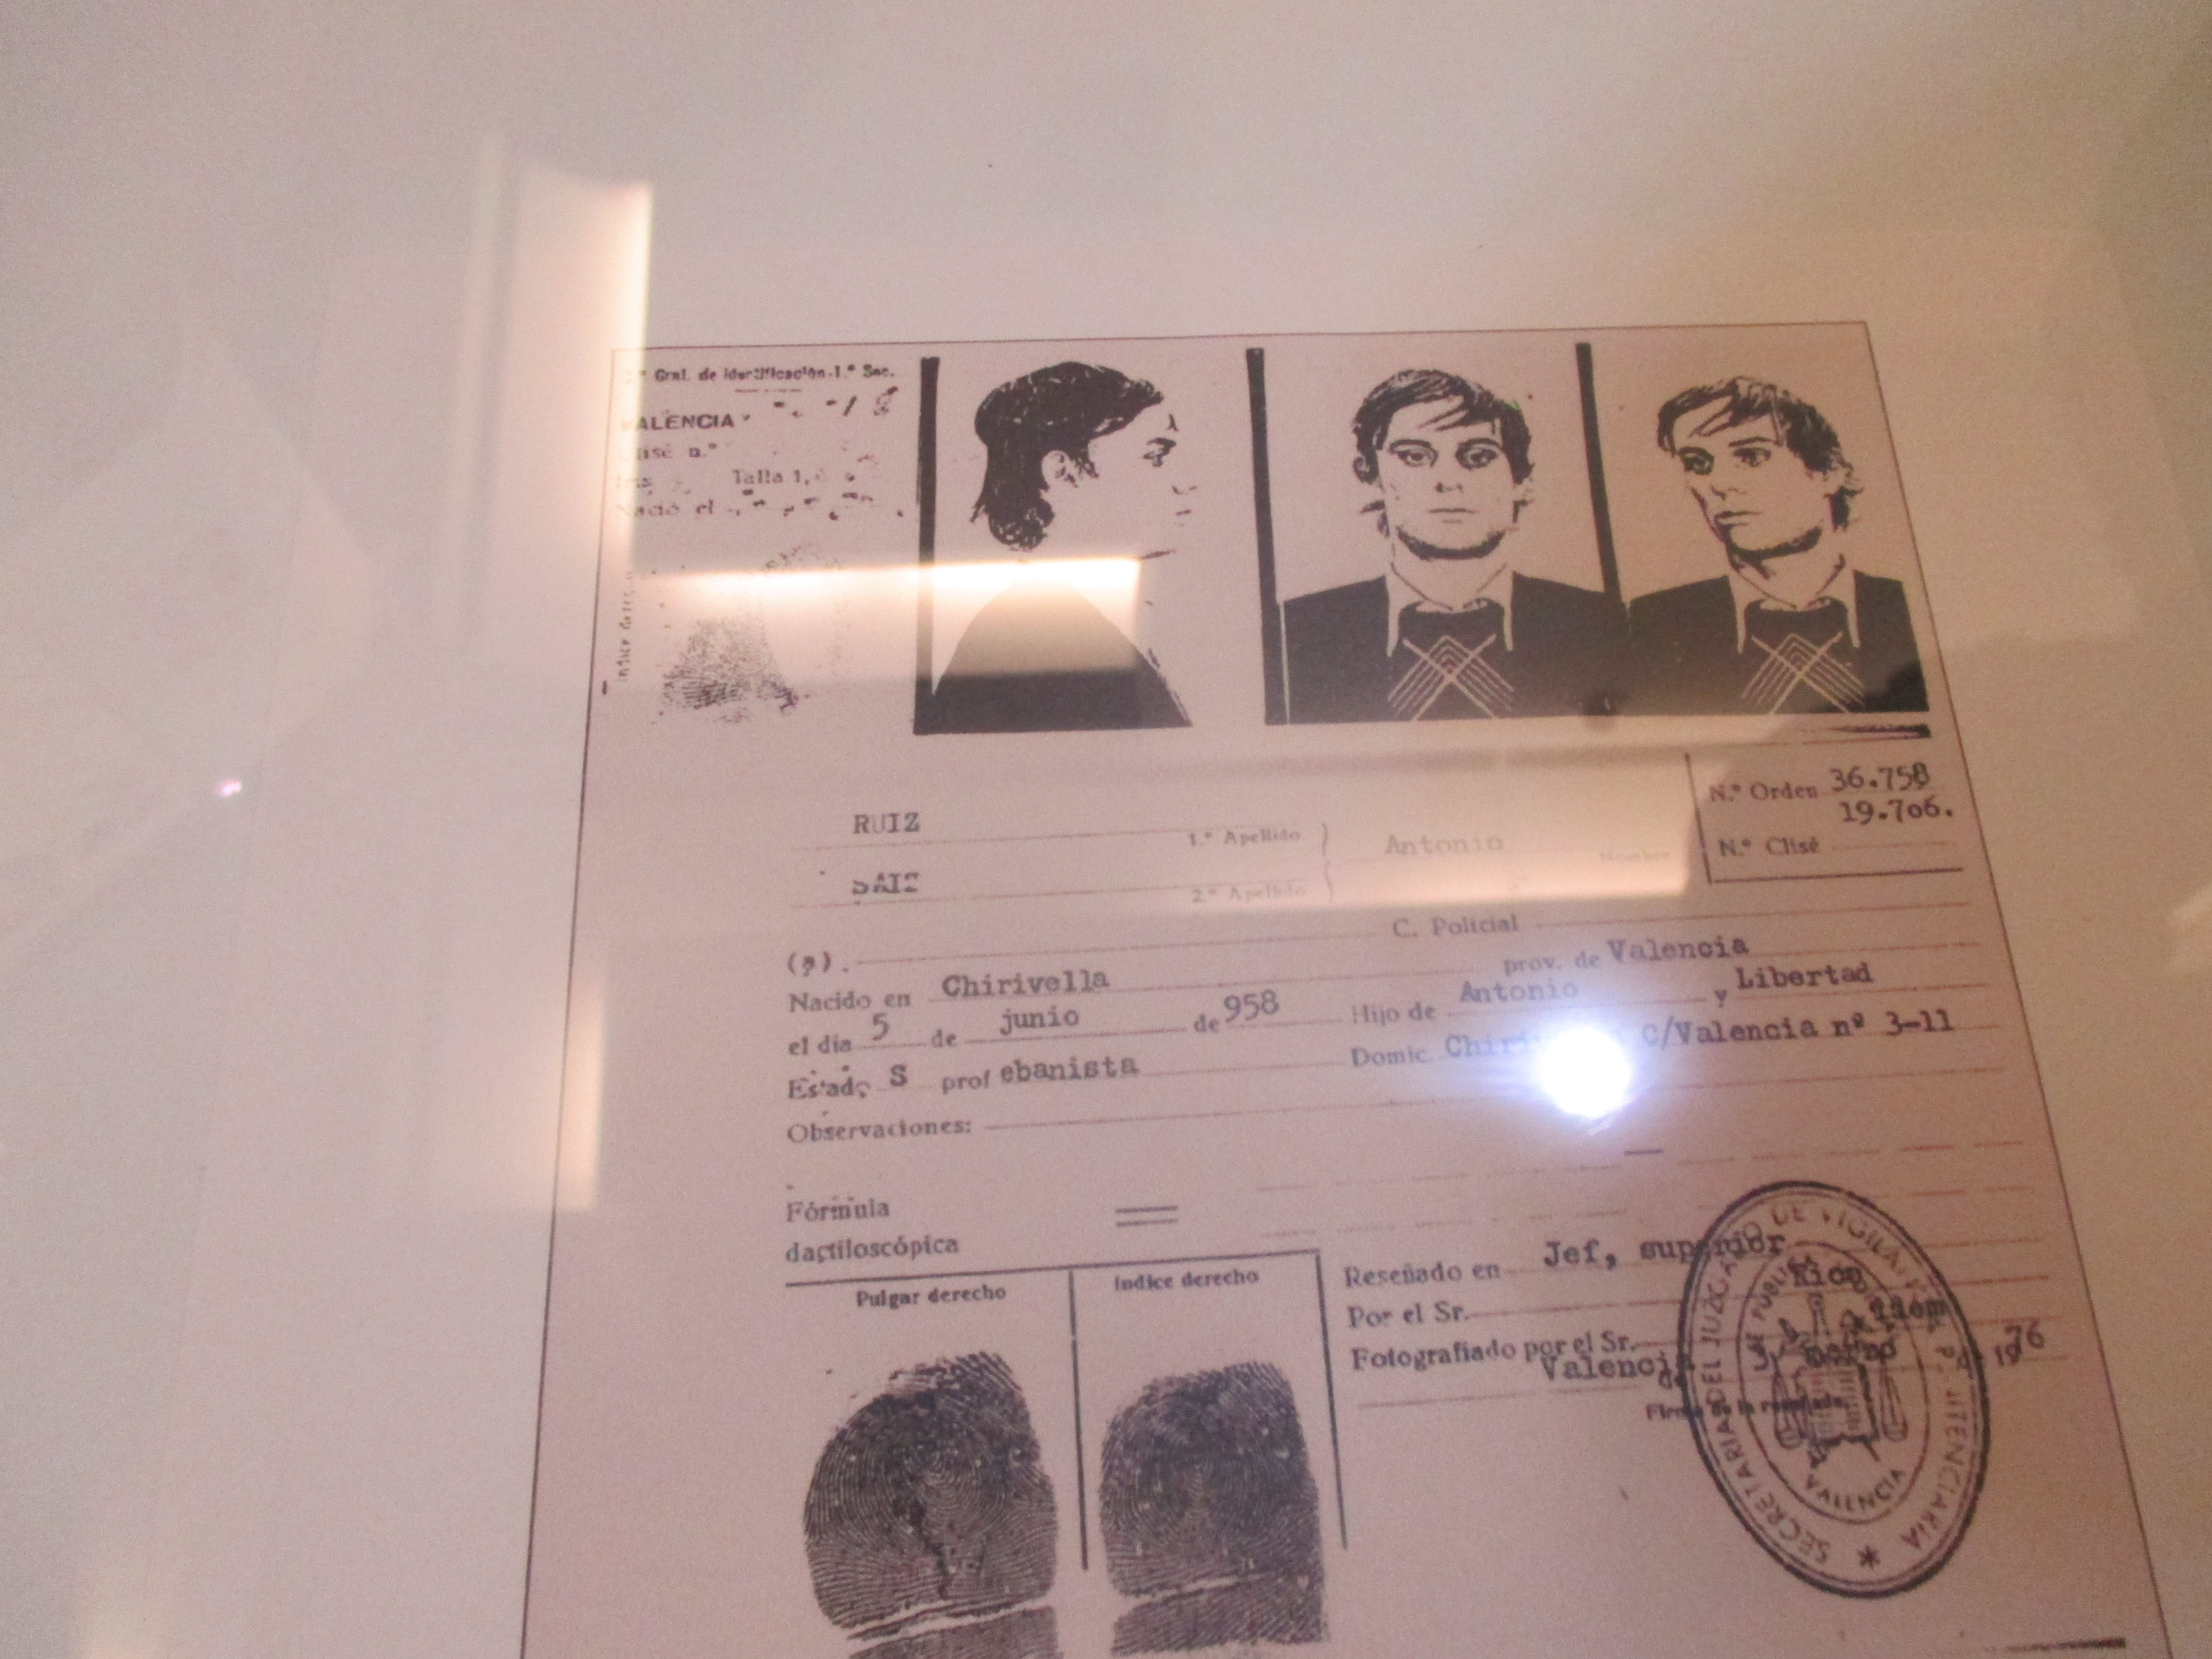 On display in an LGBTM-focused exhibit at the Centro Centro building shows mugshots, fingerprints of a man arrested for being gay in 1958